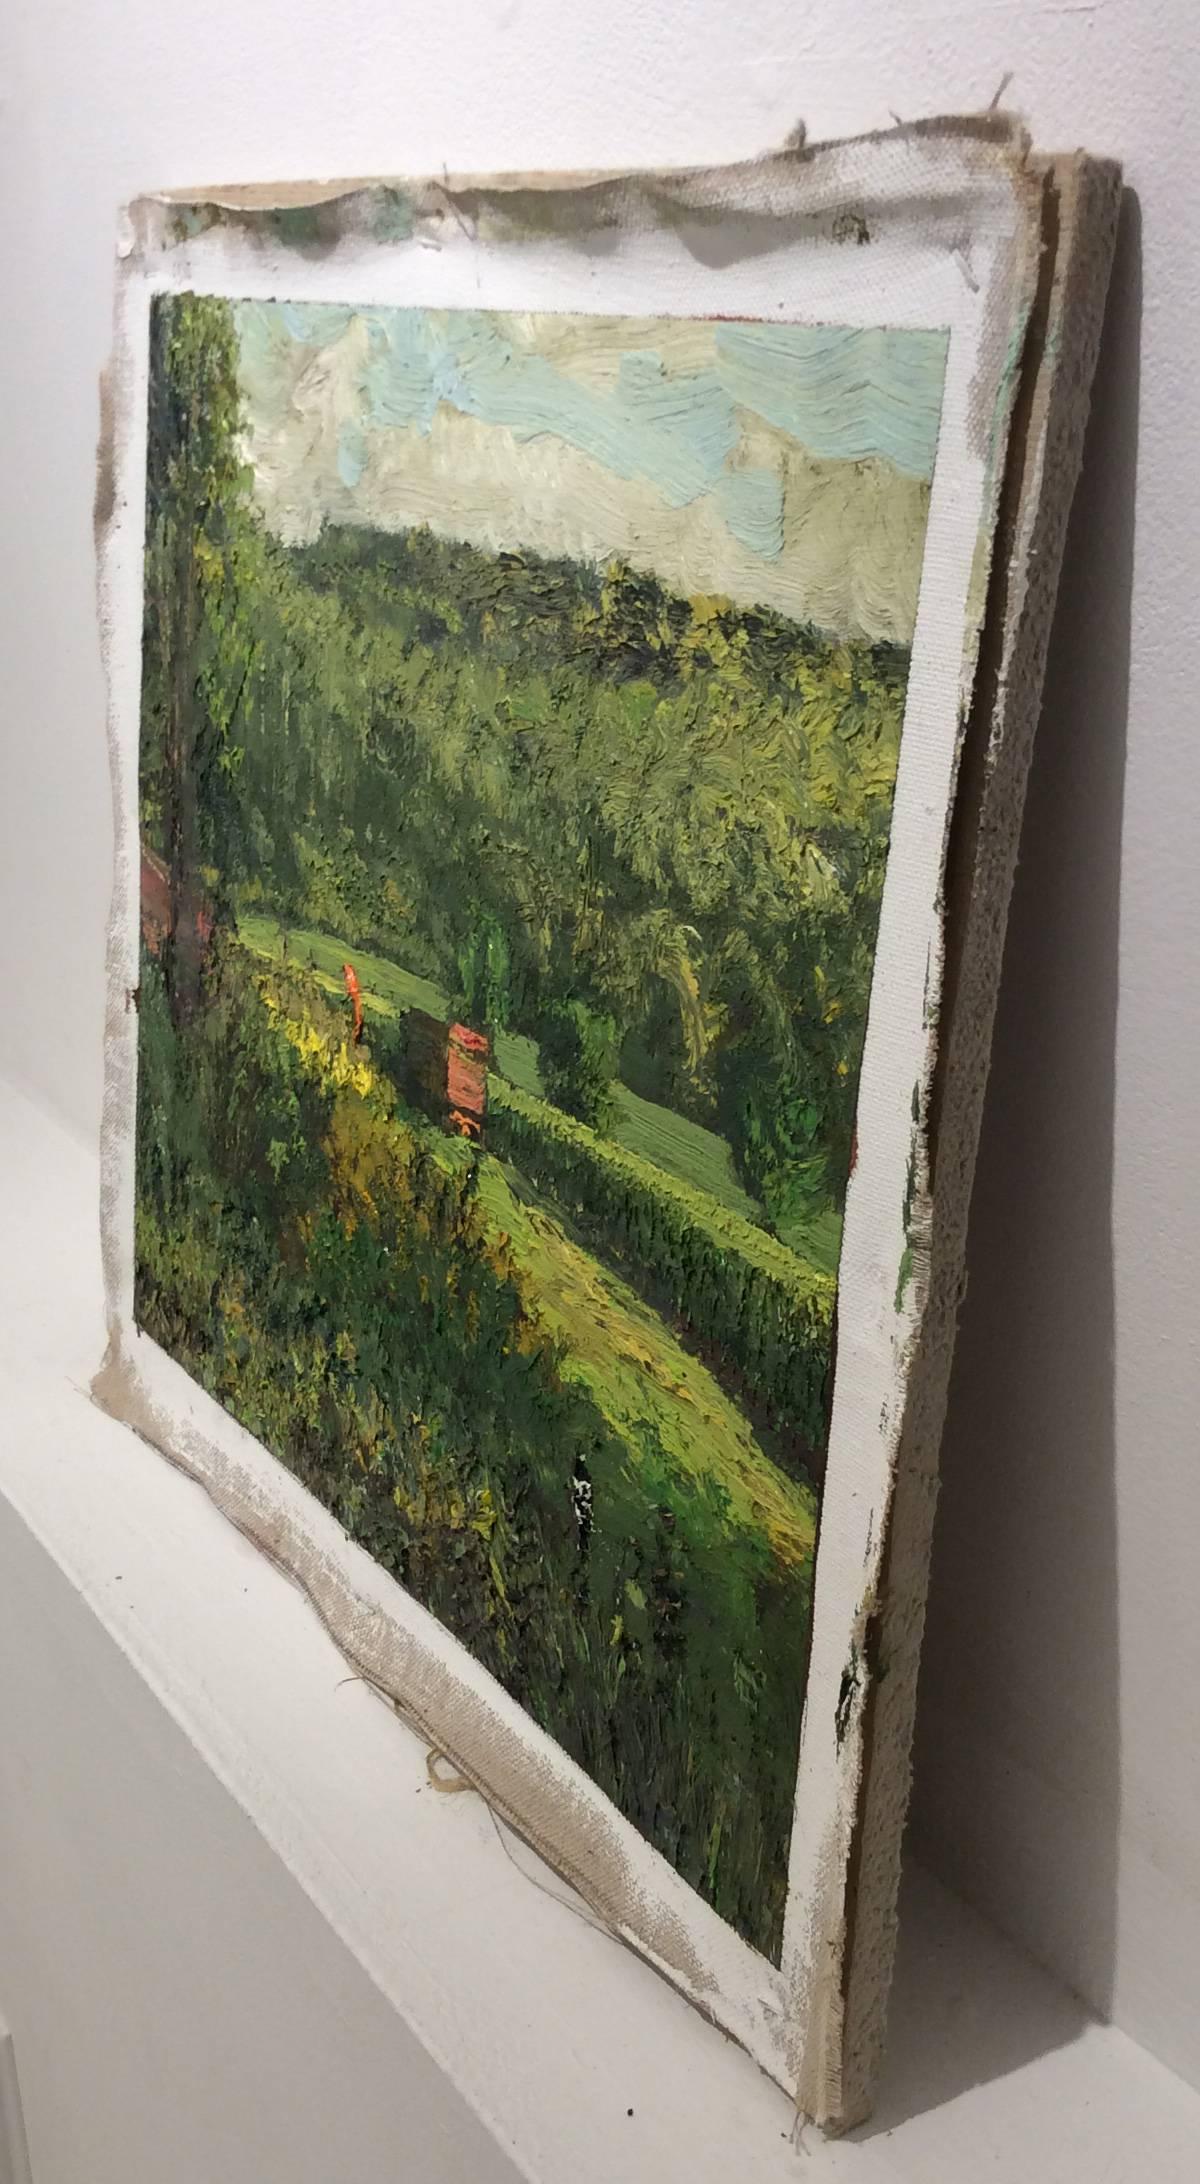 oil on linen on homasote board, unframed
14.25 x 16.25 inches

Harry Orlyk is celebrated for his ability to capture an rural country landscape with impressionistic brushstrokes and a bright color palette. Painting daily, the artist drives throughout